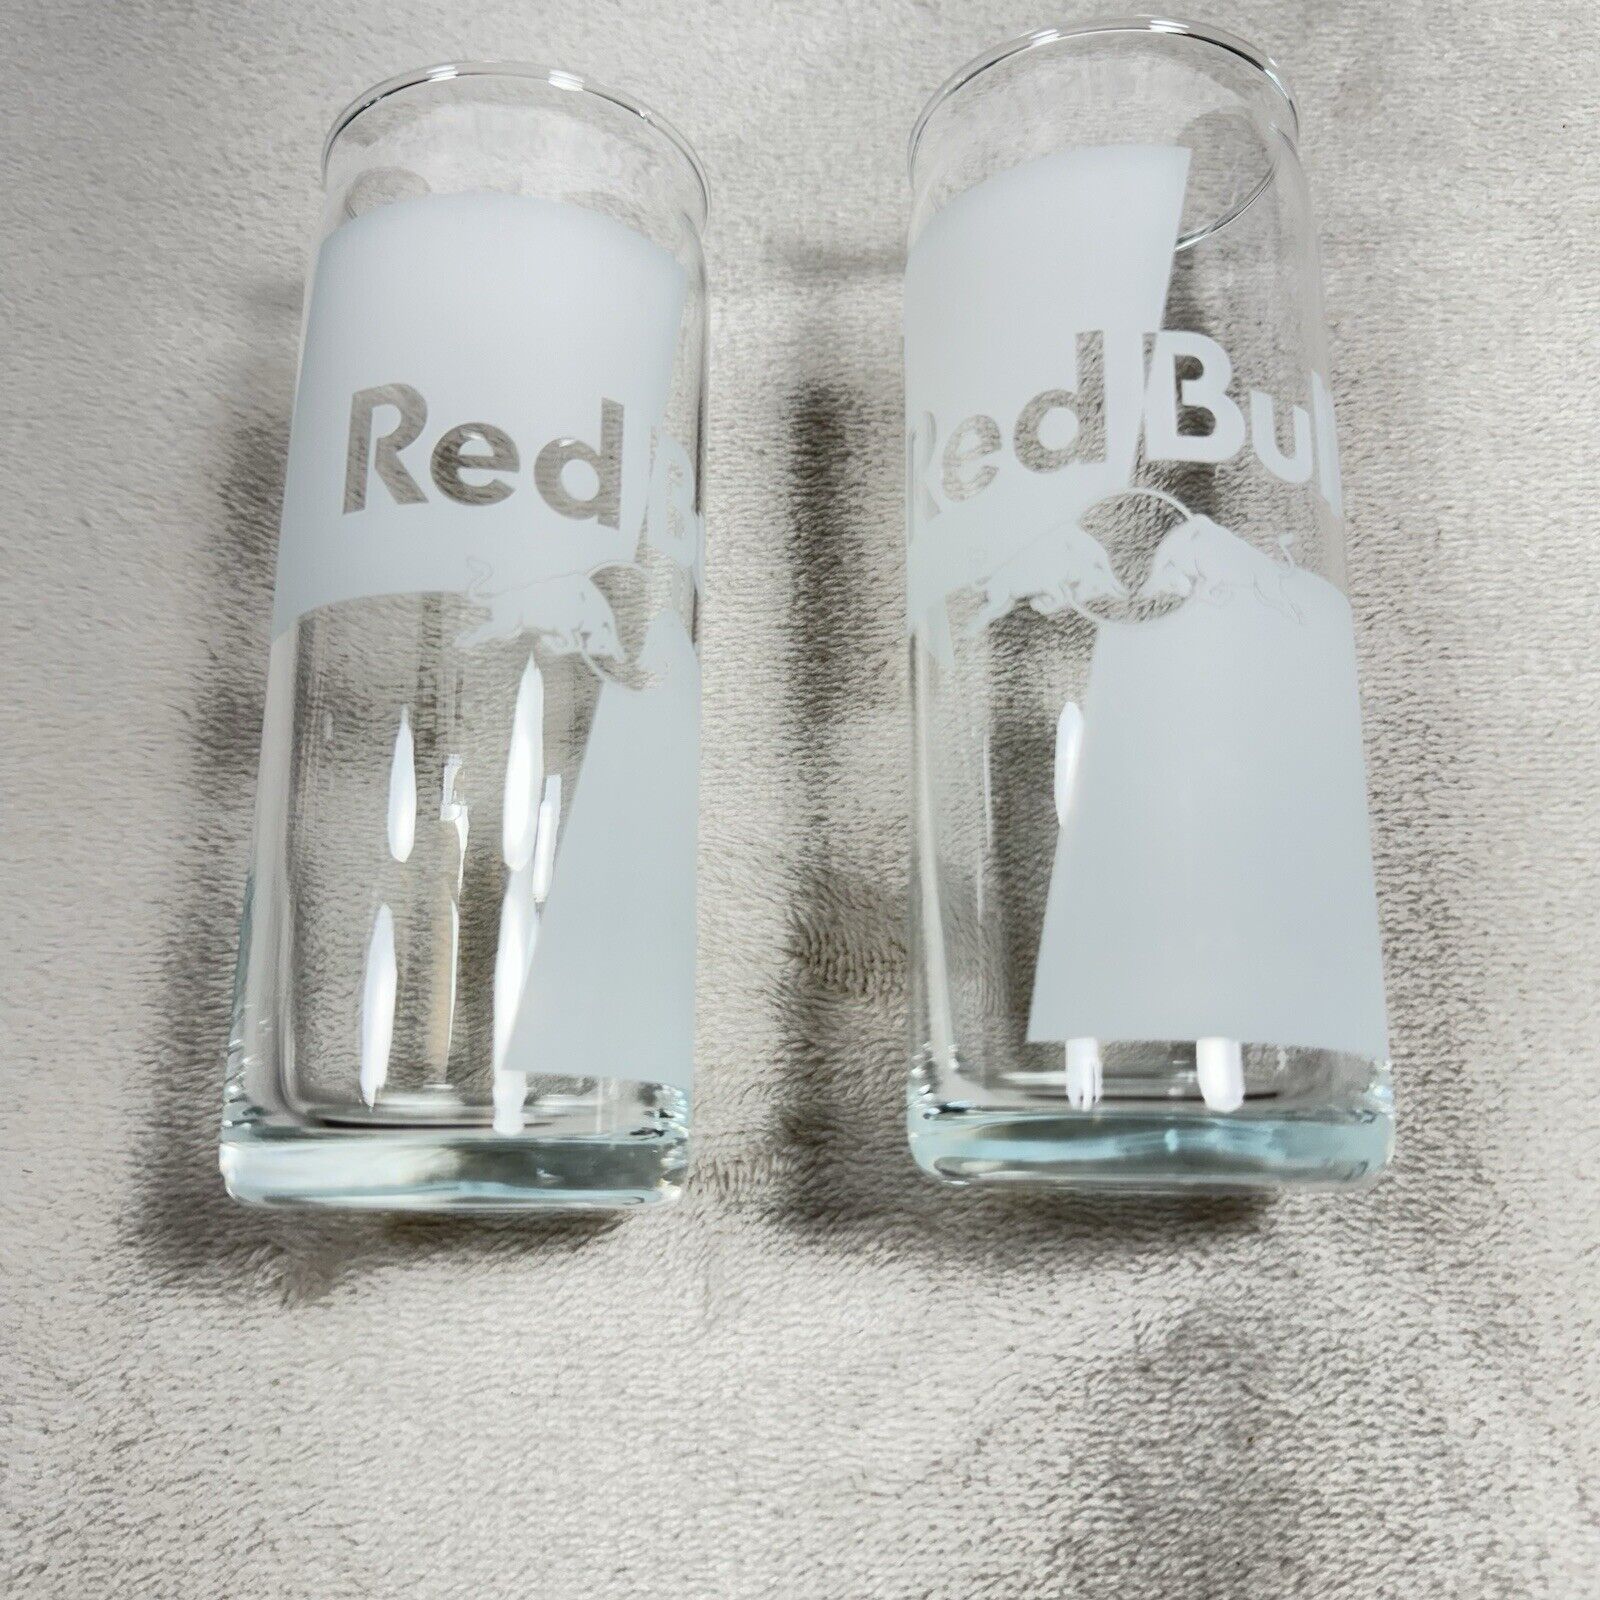 Redbull Logo Drinking Clear Glass Cups Set Of 2